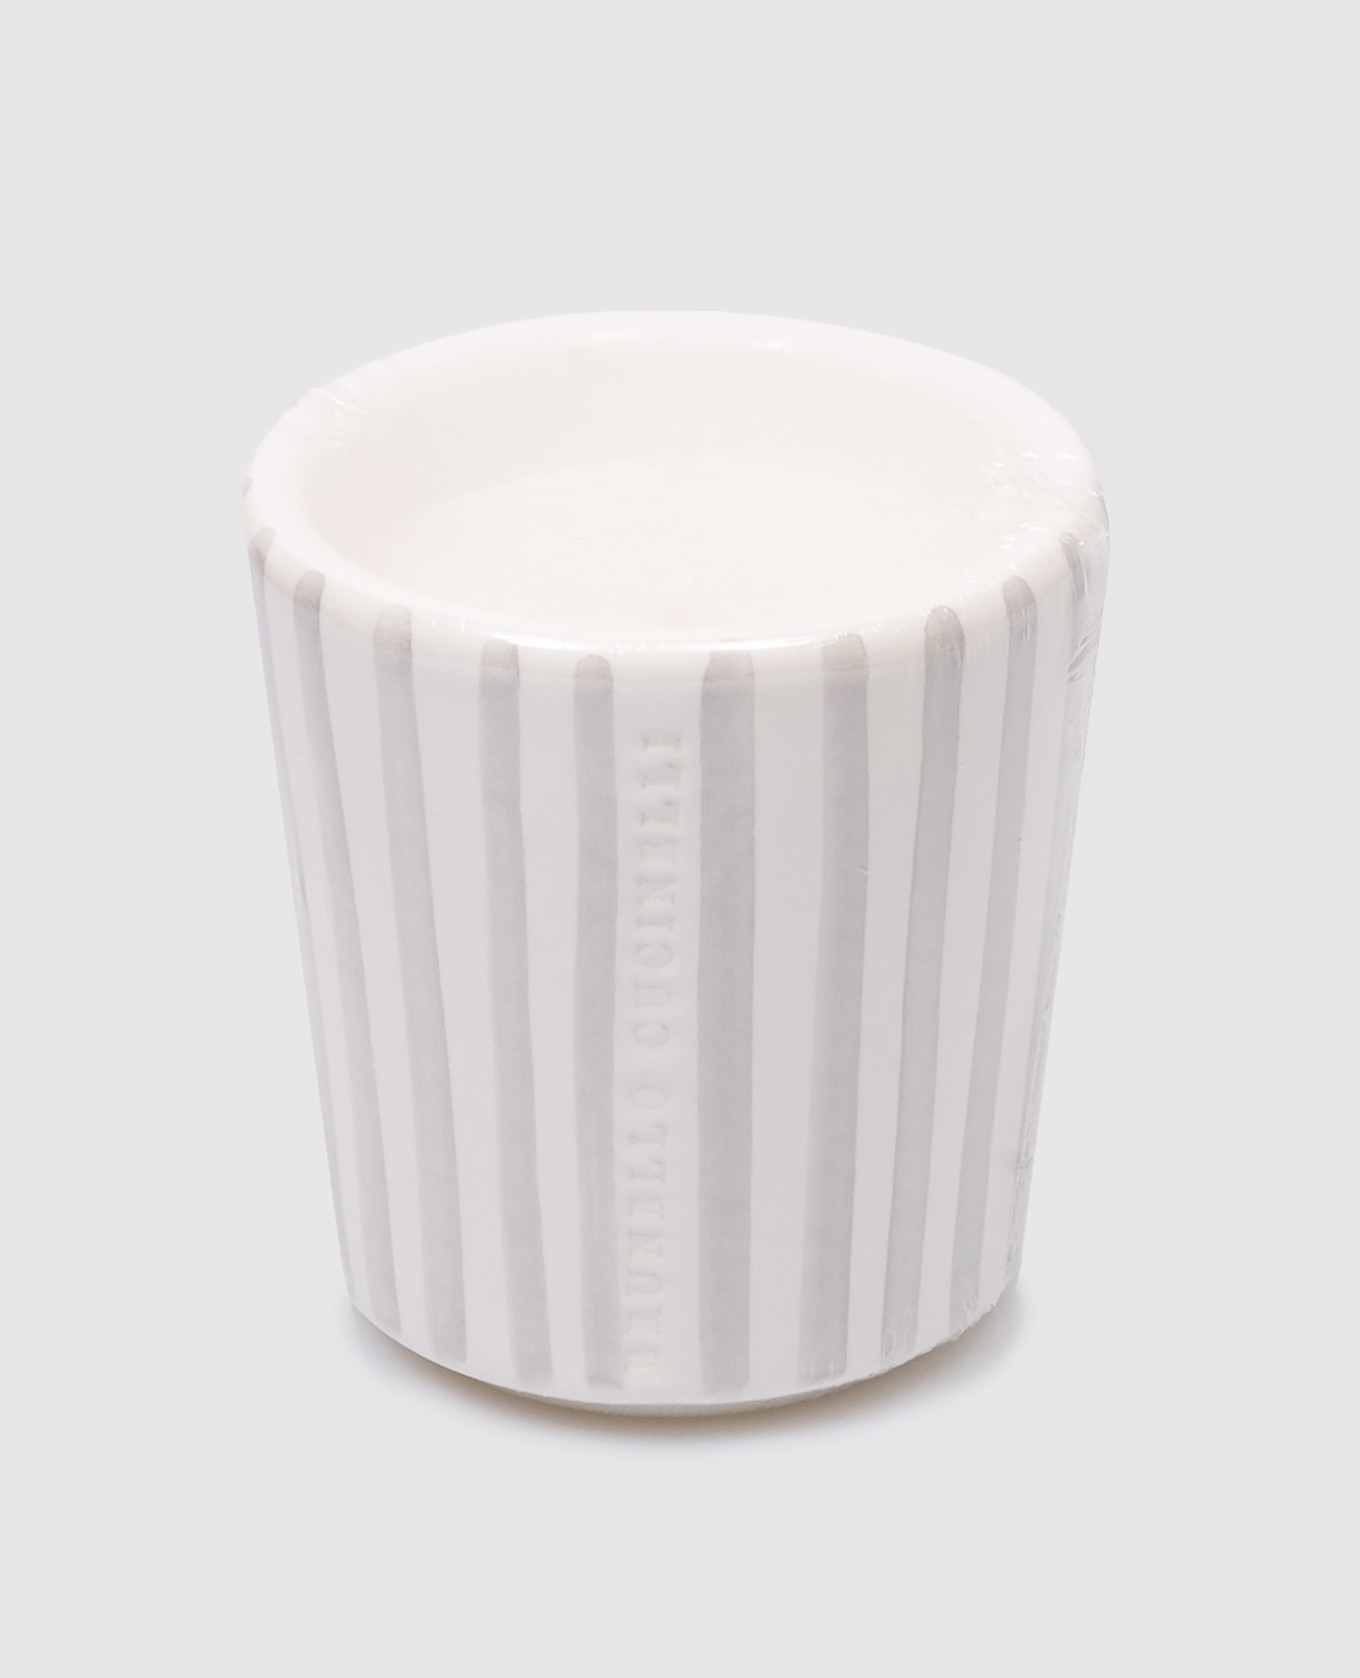 A white scented candle in a gray striped ceramic candle holder with a logo